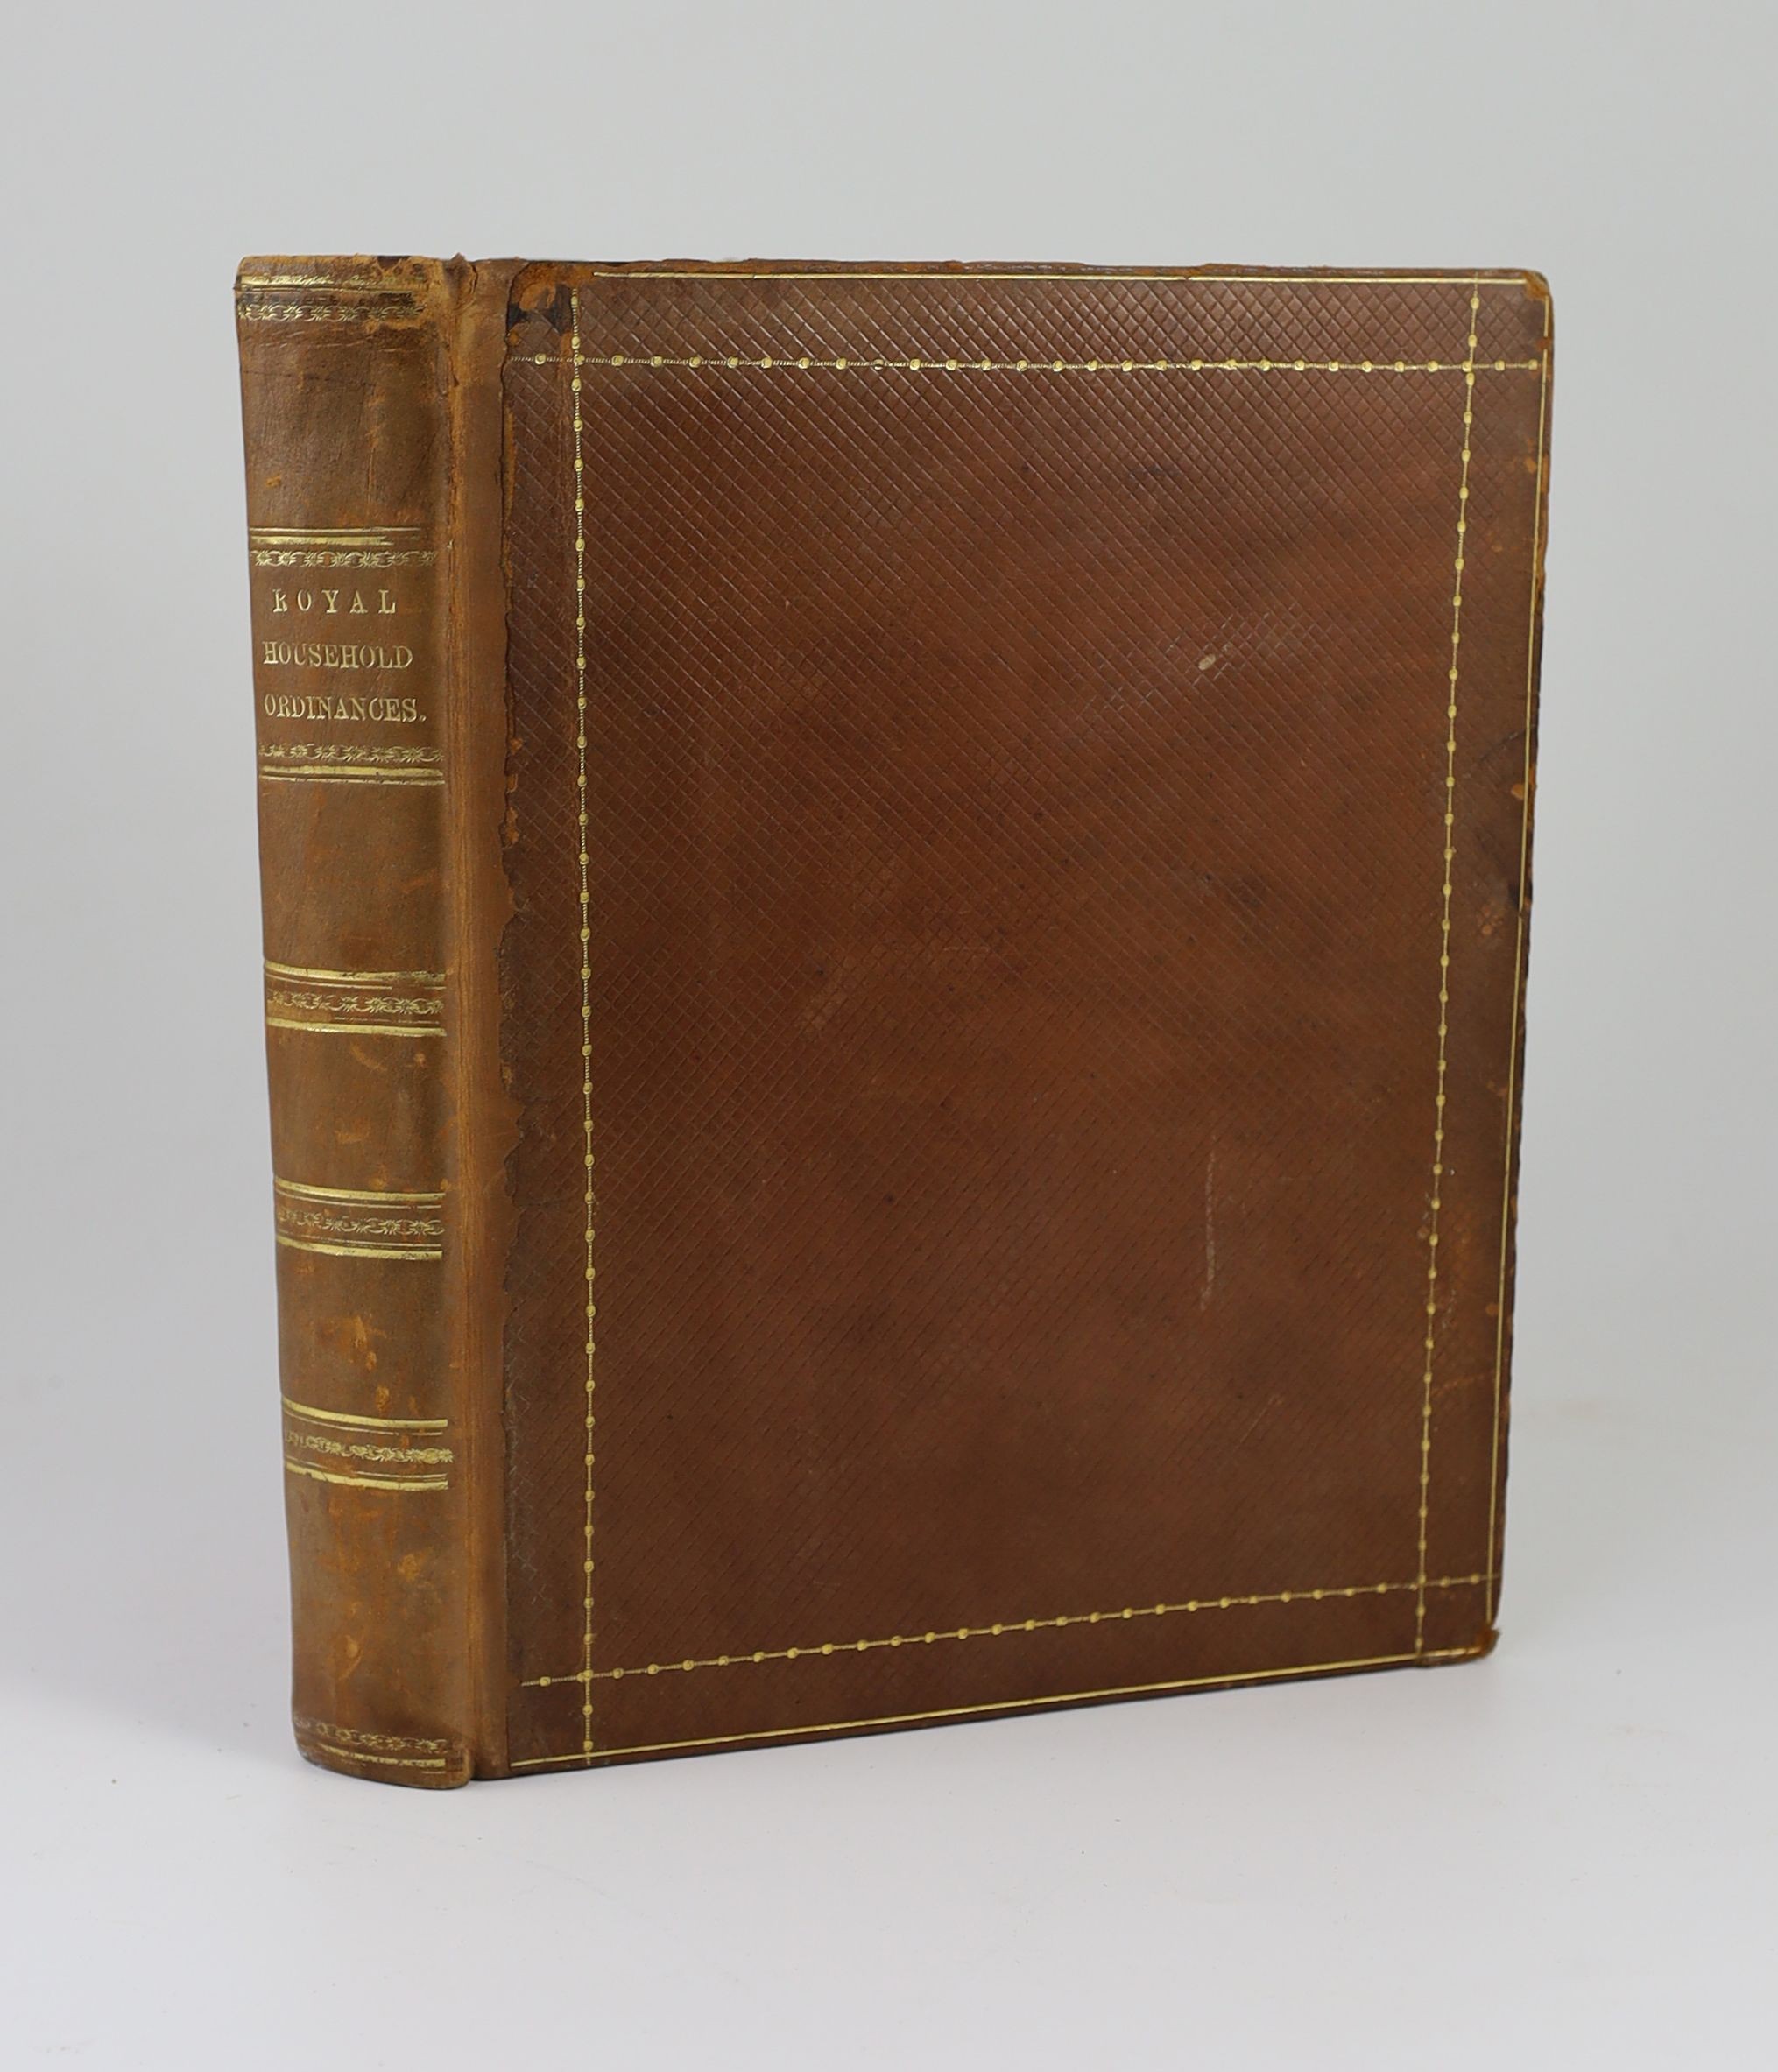 (Royal Household) - A Collection of Ordinances and Regulations for the Government of the Royal Household..... also Receipts in Ancient Cookery. engraved title device; contemp. diced calf, gilt ruled and lettered spine, m